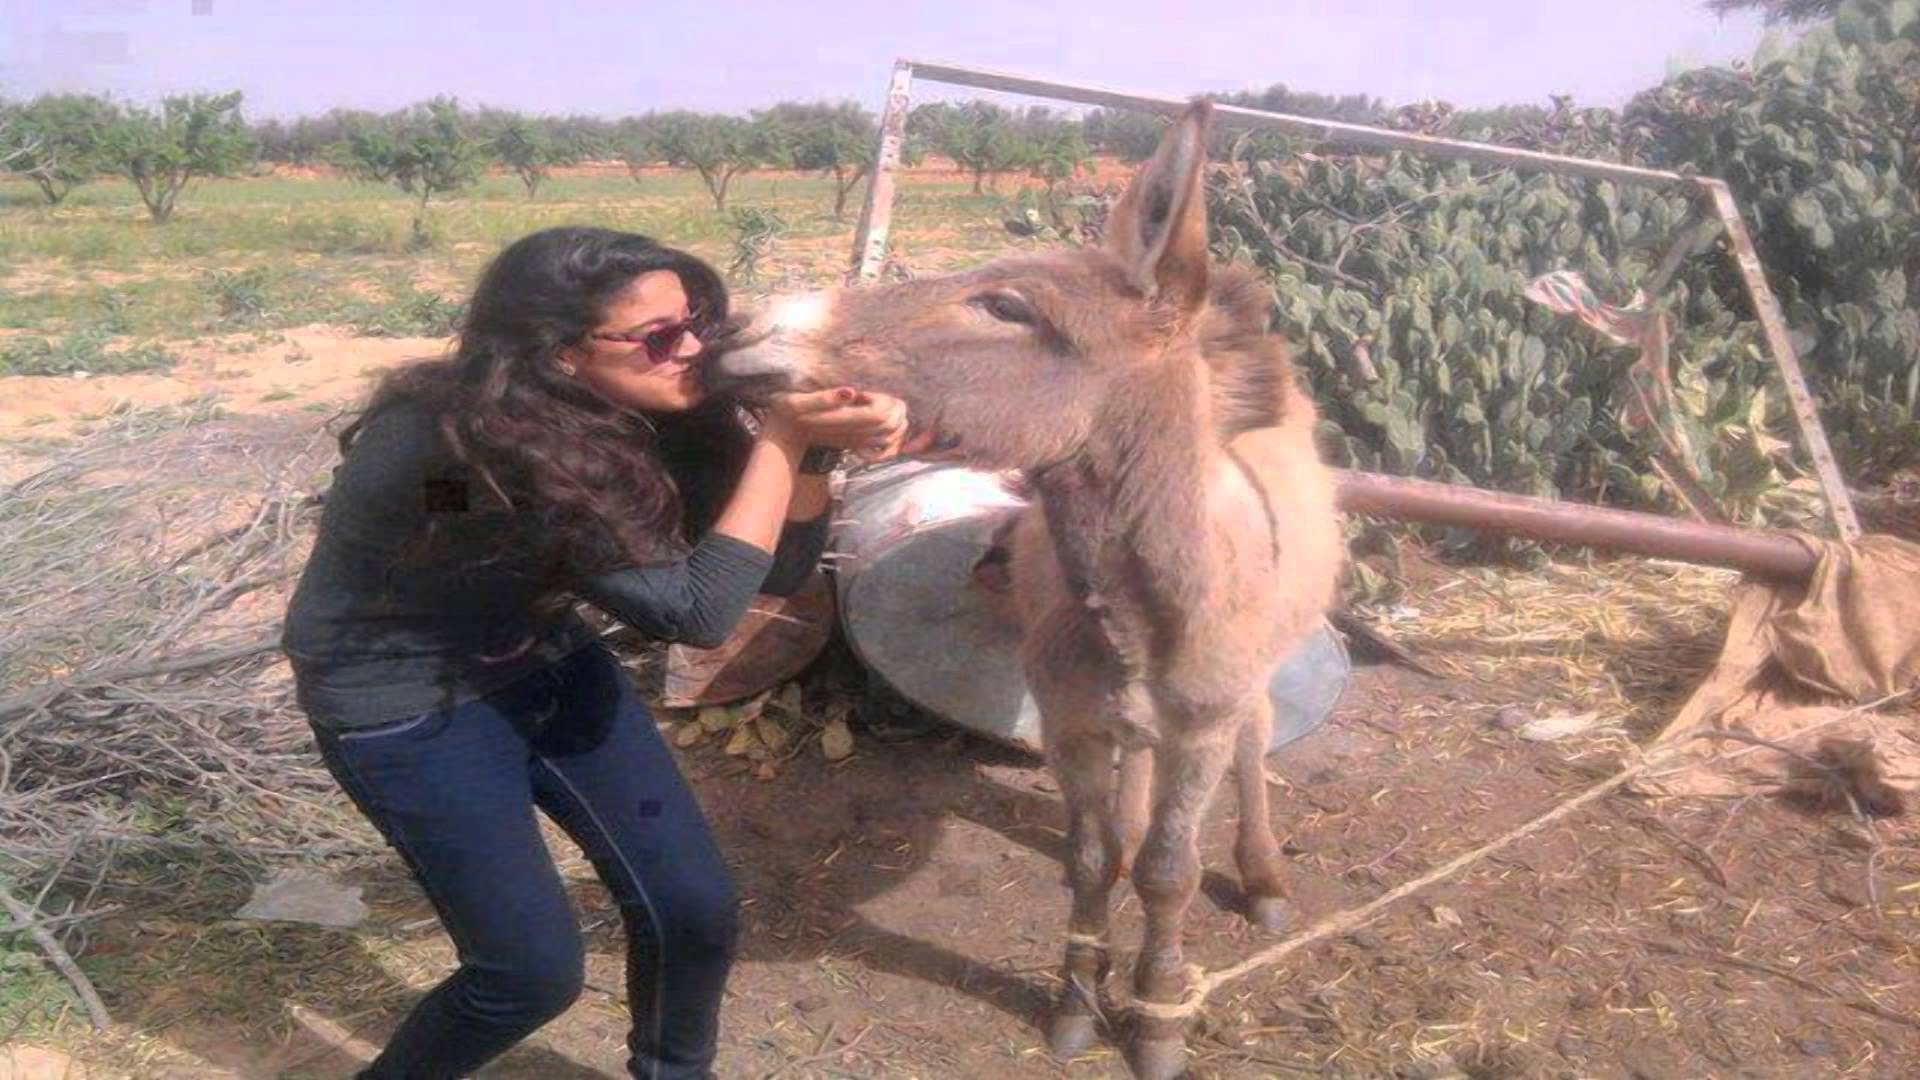 Girl And Donkey Funny Kissing Picture.